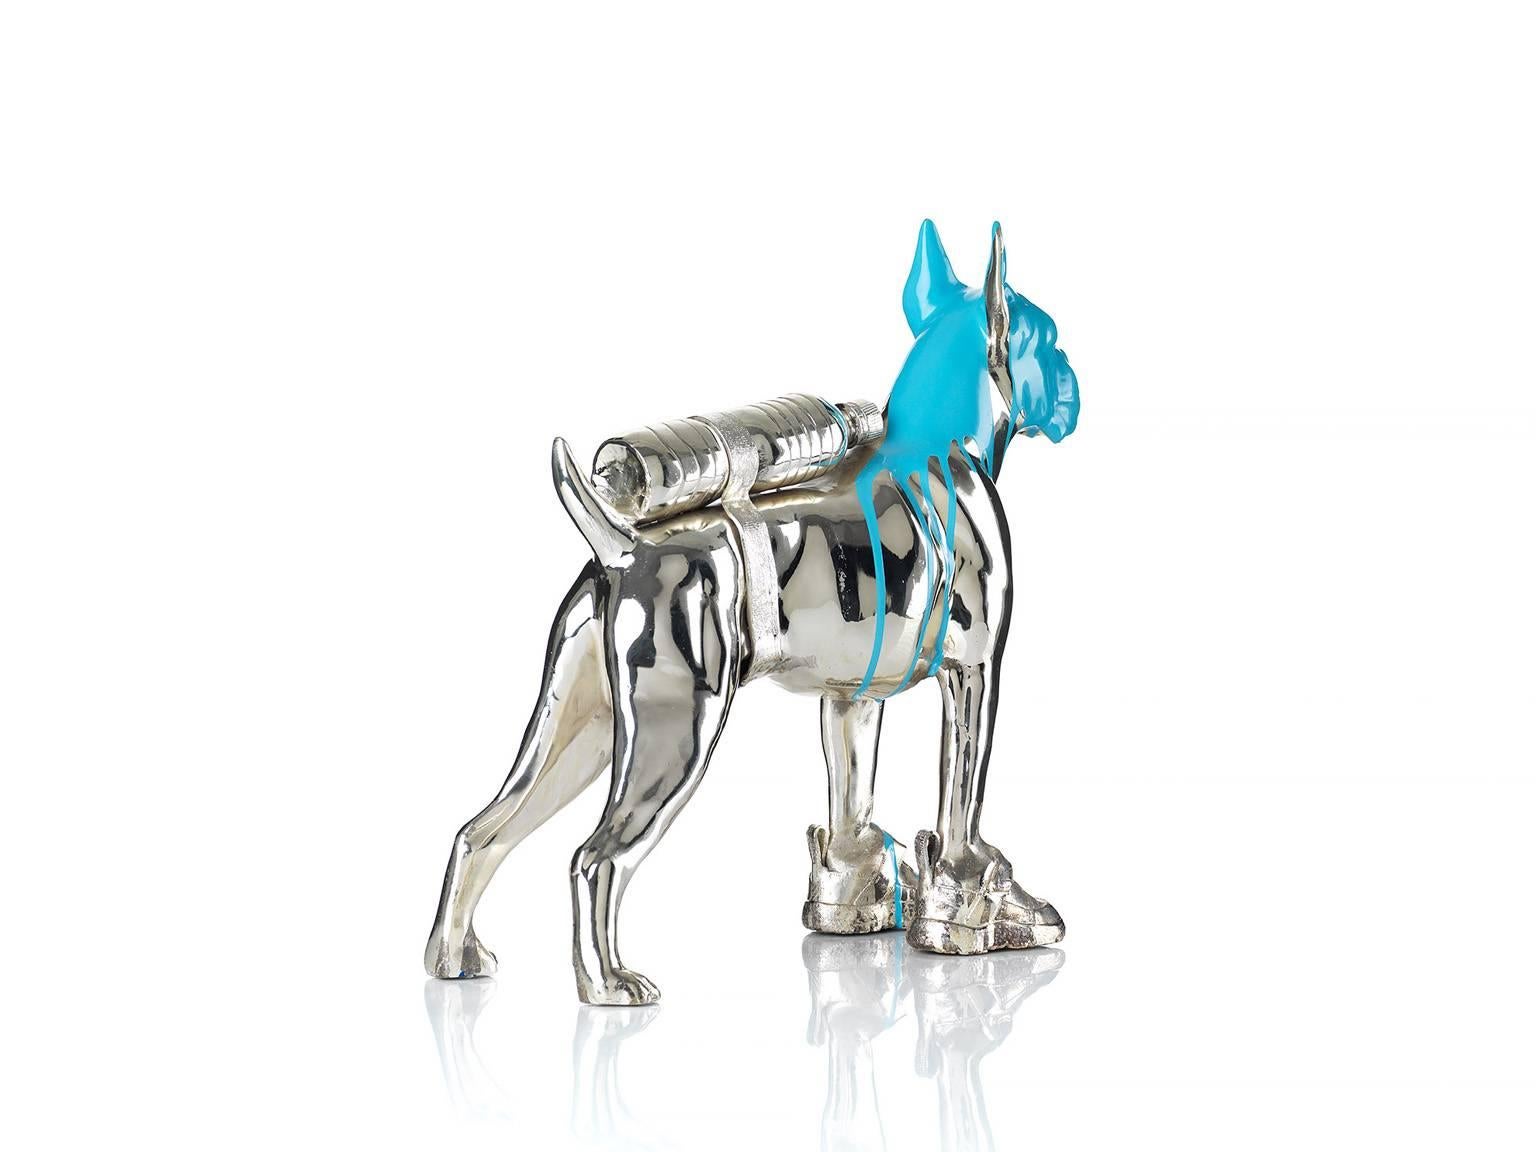 Cloned Bulldog with pet bottle.  - Gold Figurative Sculpture by William Sweetlove